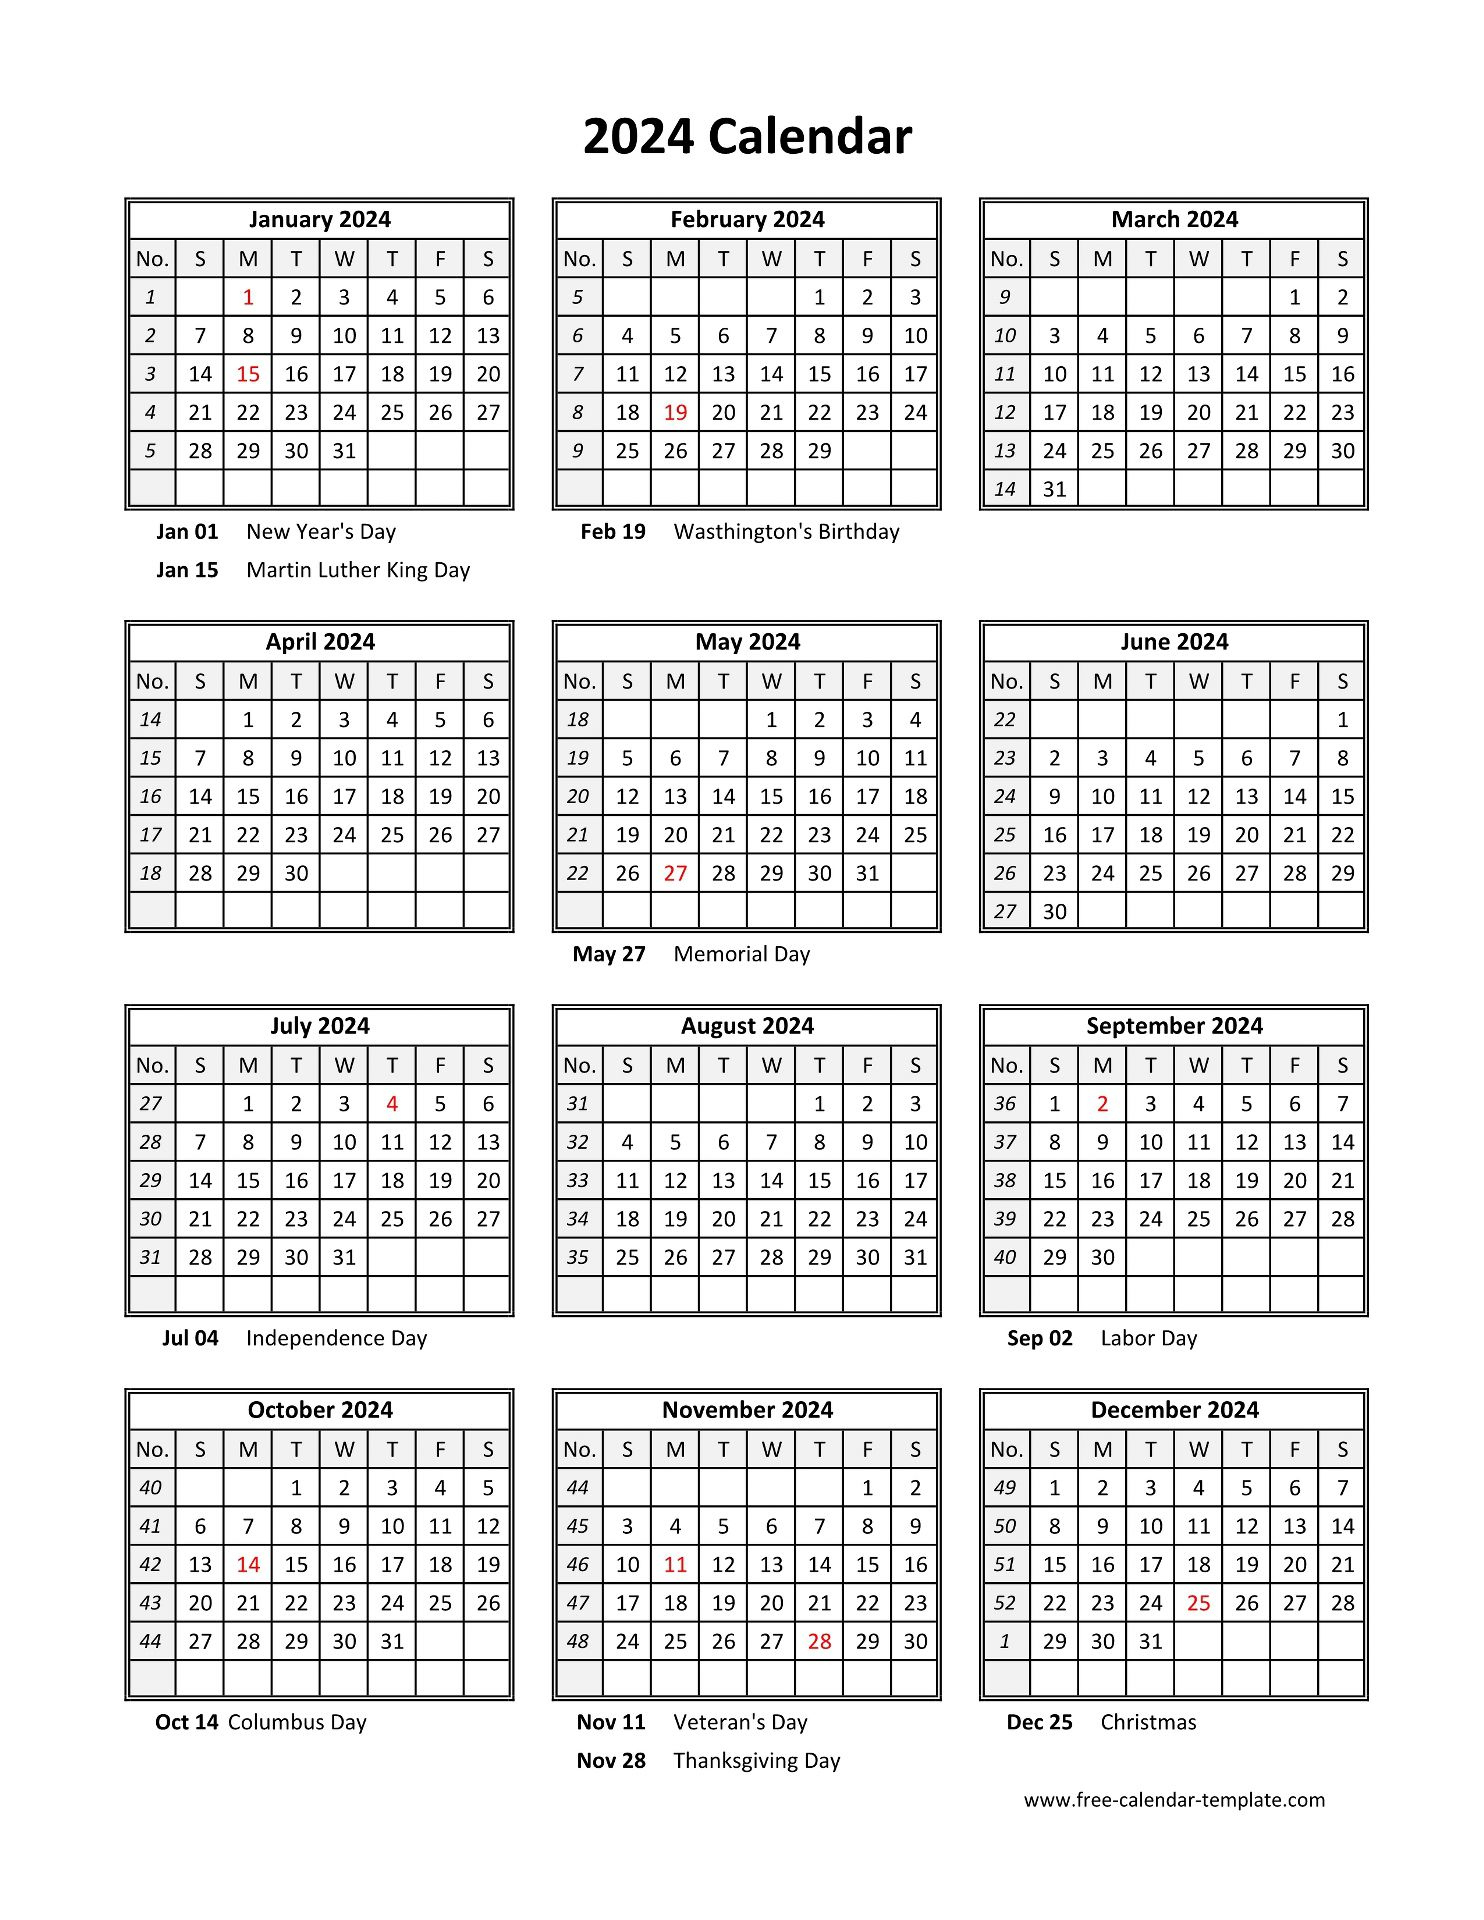 Yearly Printable Calendar 2024 With Holidays | Free-Calendar | Printable Calendar 2024 Yearly Free